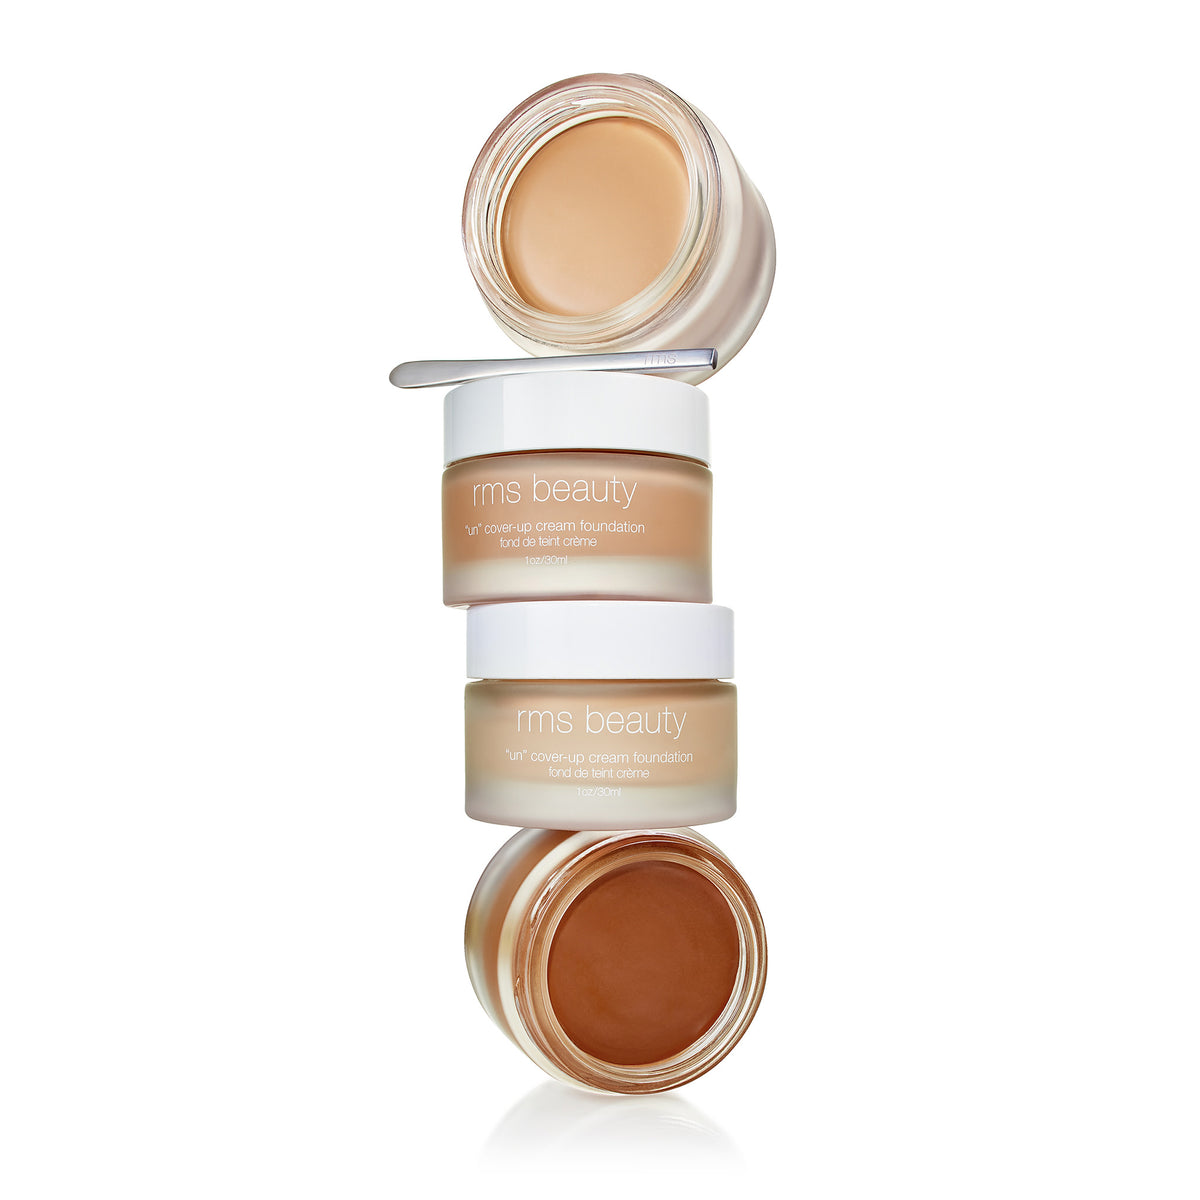 RMS Beauty UnCoverup Cream Foundation . This product is for medium warm beige complexions